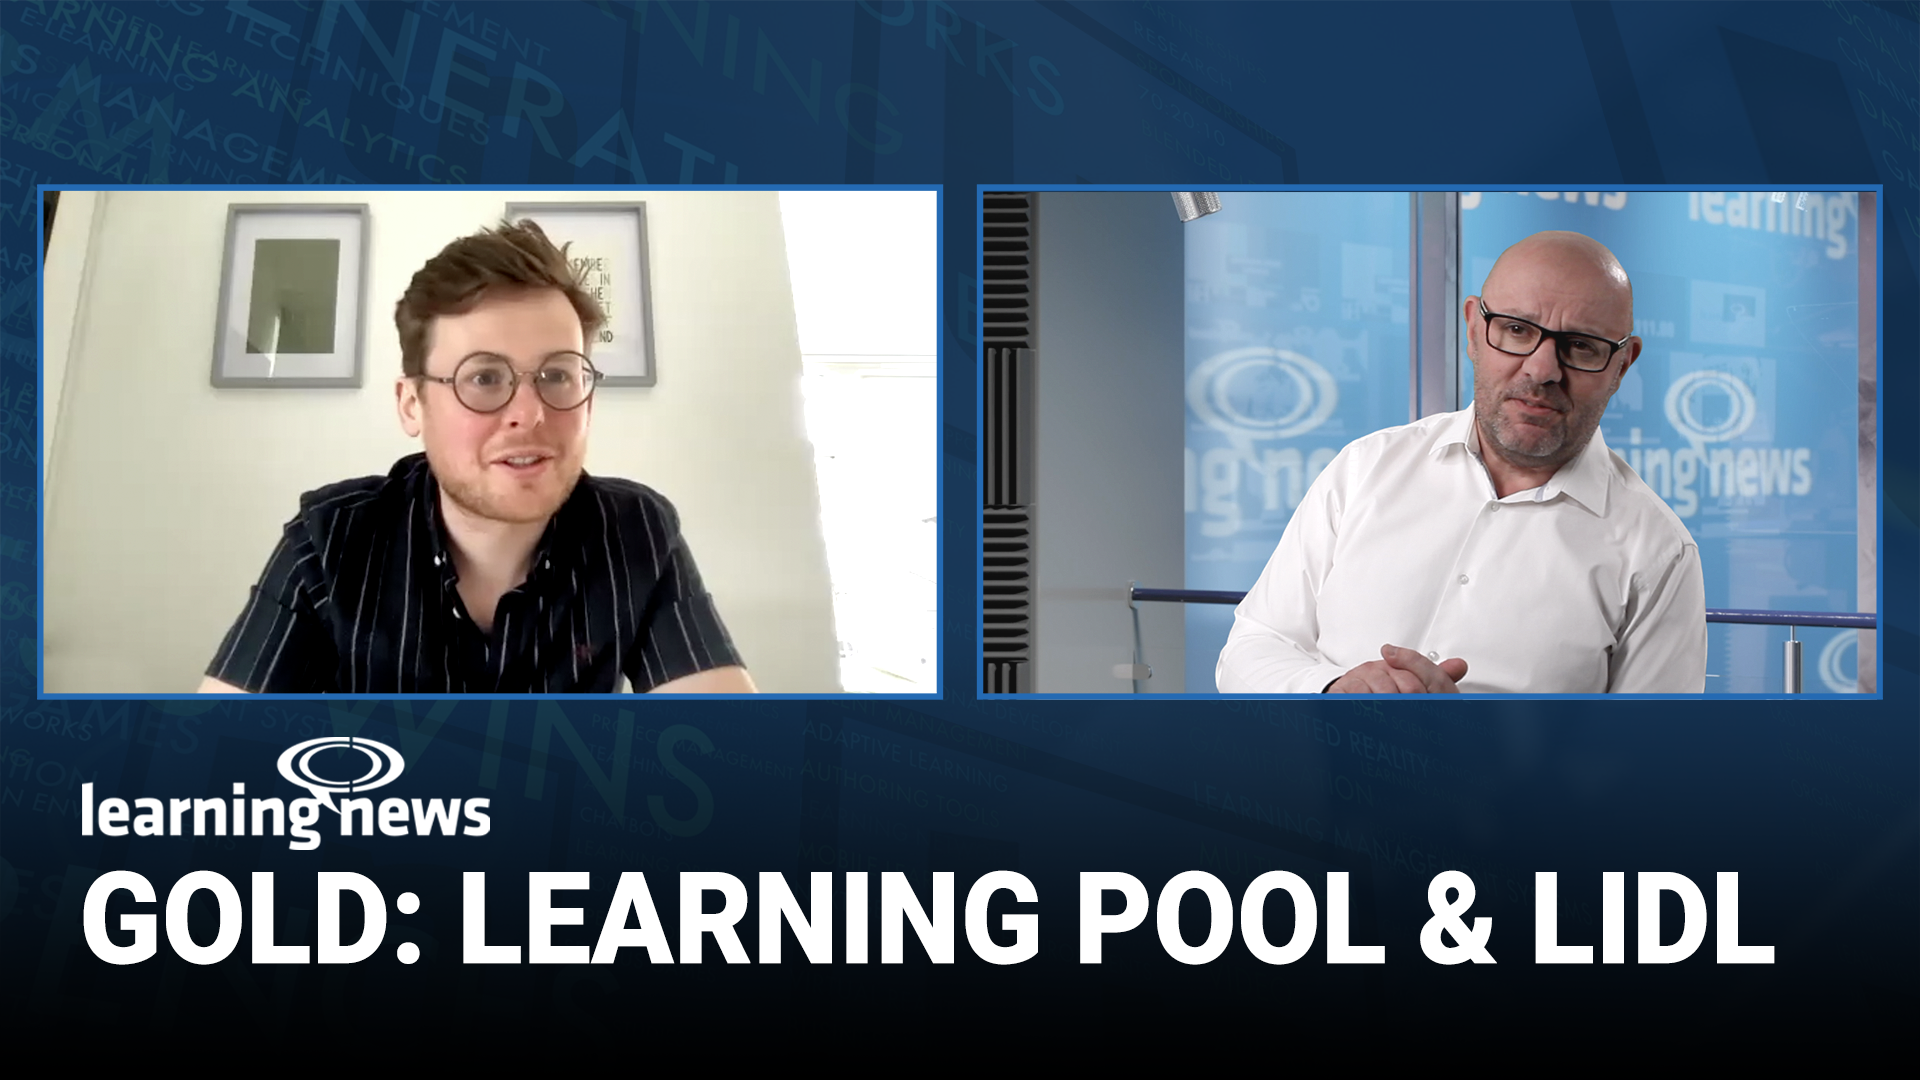 Jack Quantrill joins Learning News to talk about Learning Pool’s work with supermarket, Lidl